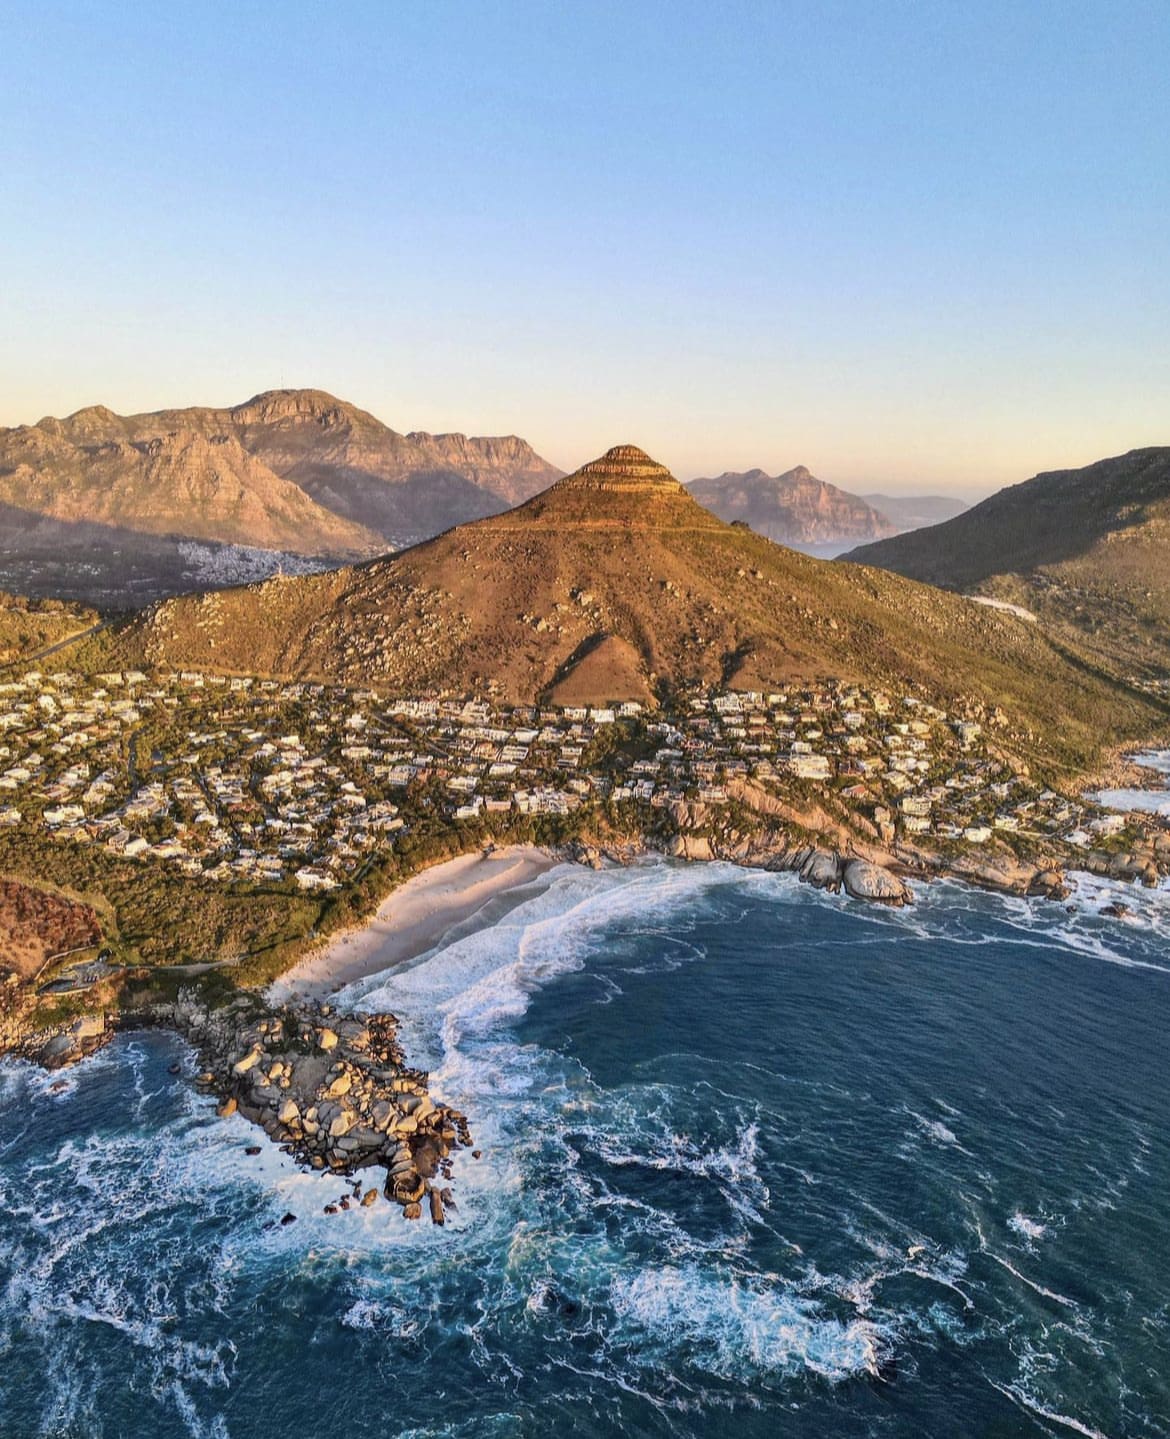 Views of Llandudno, Cape Town from a helictoper